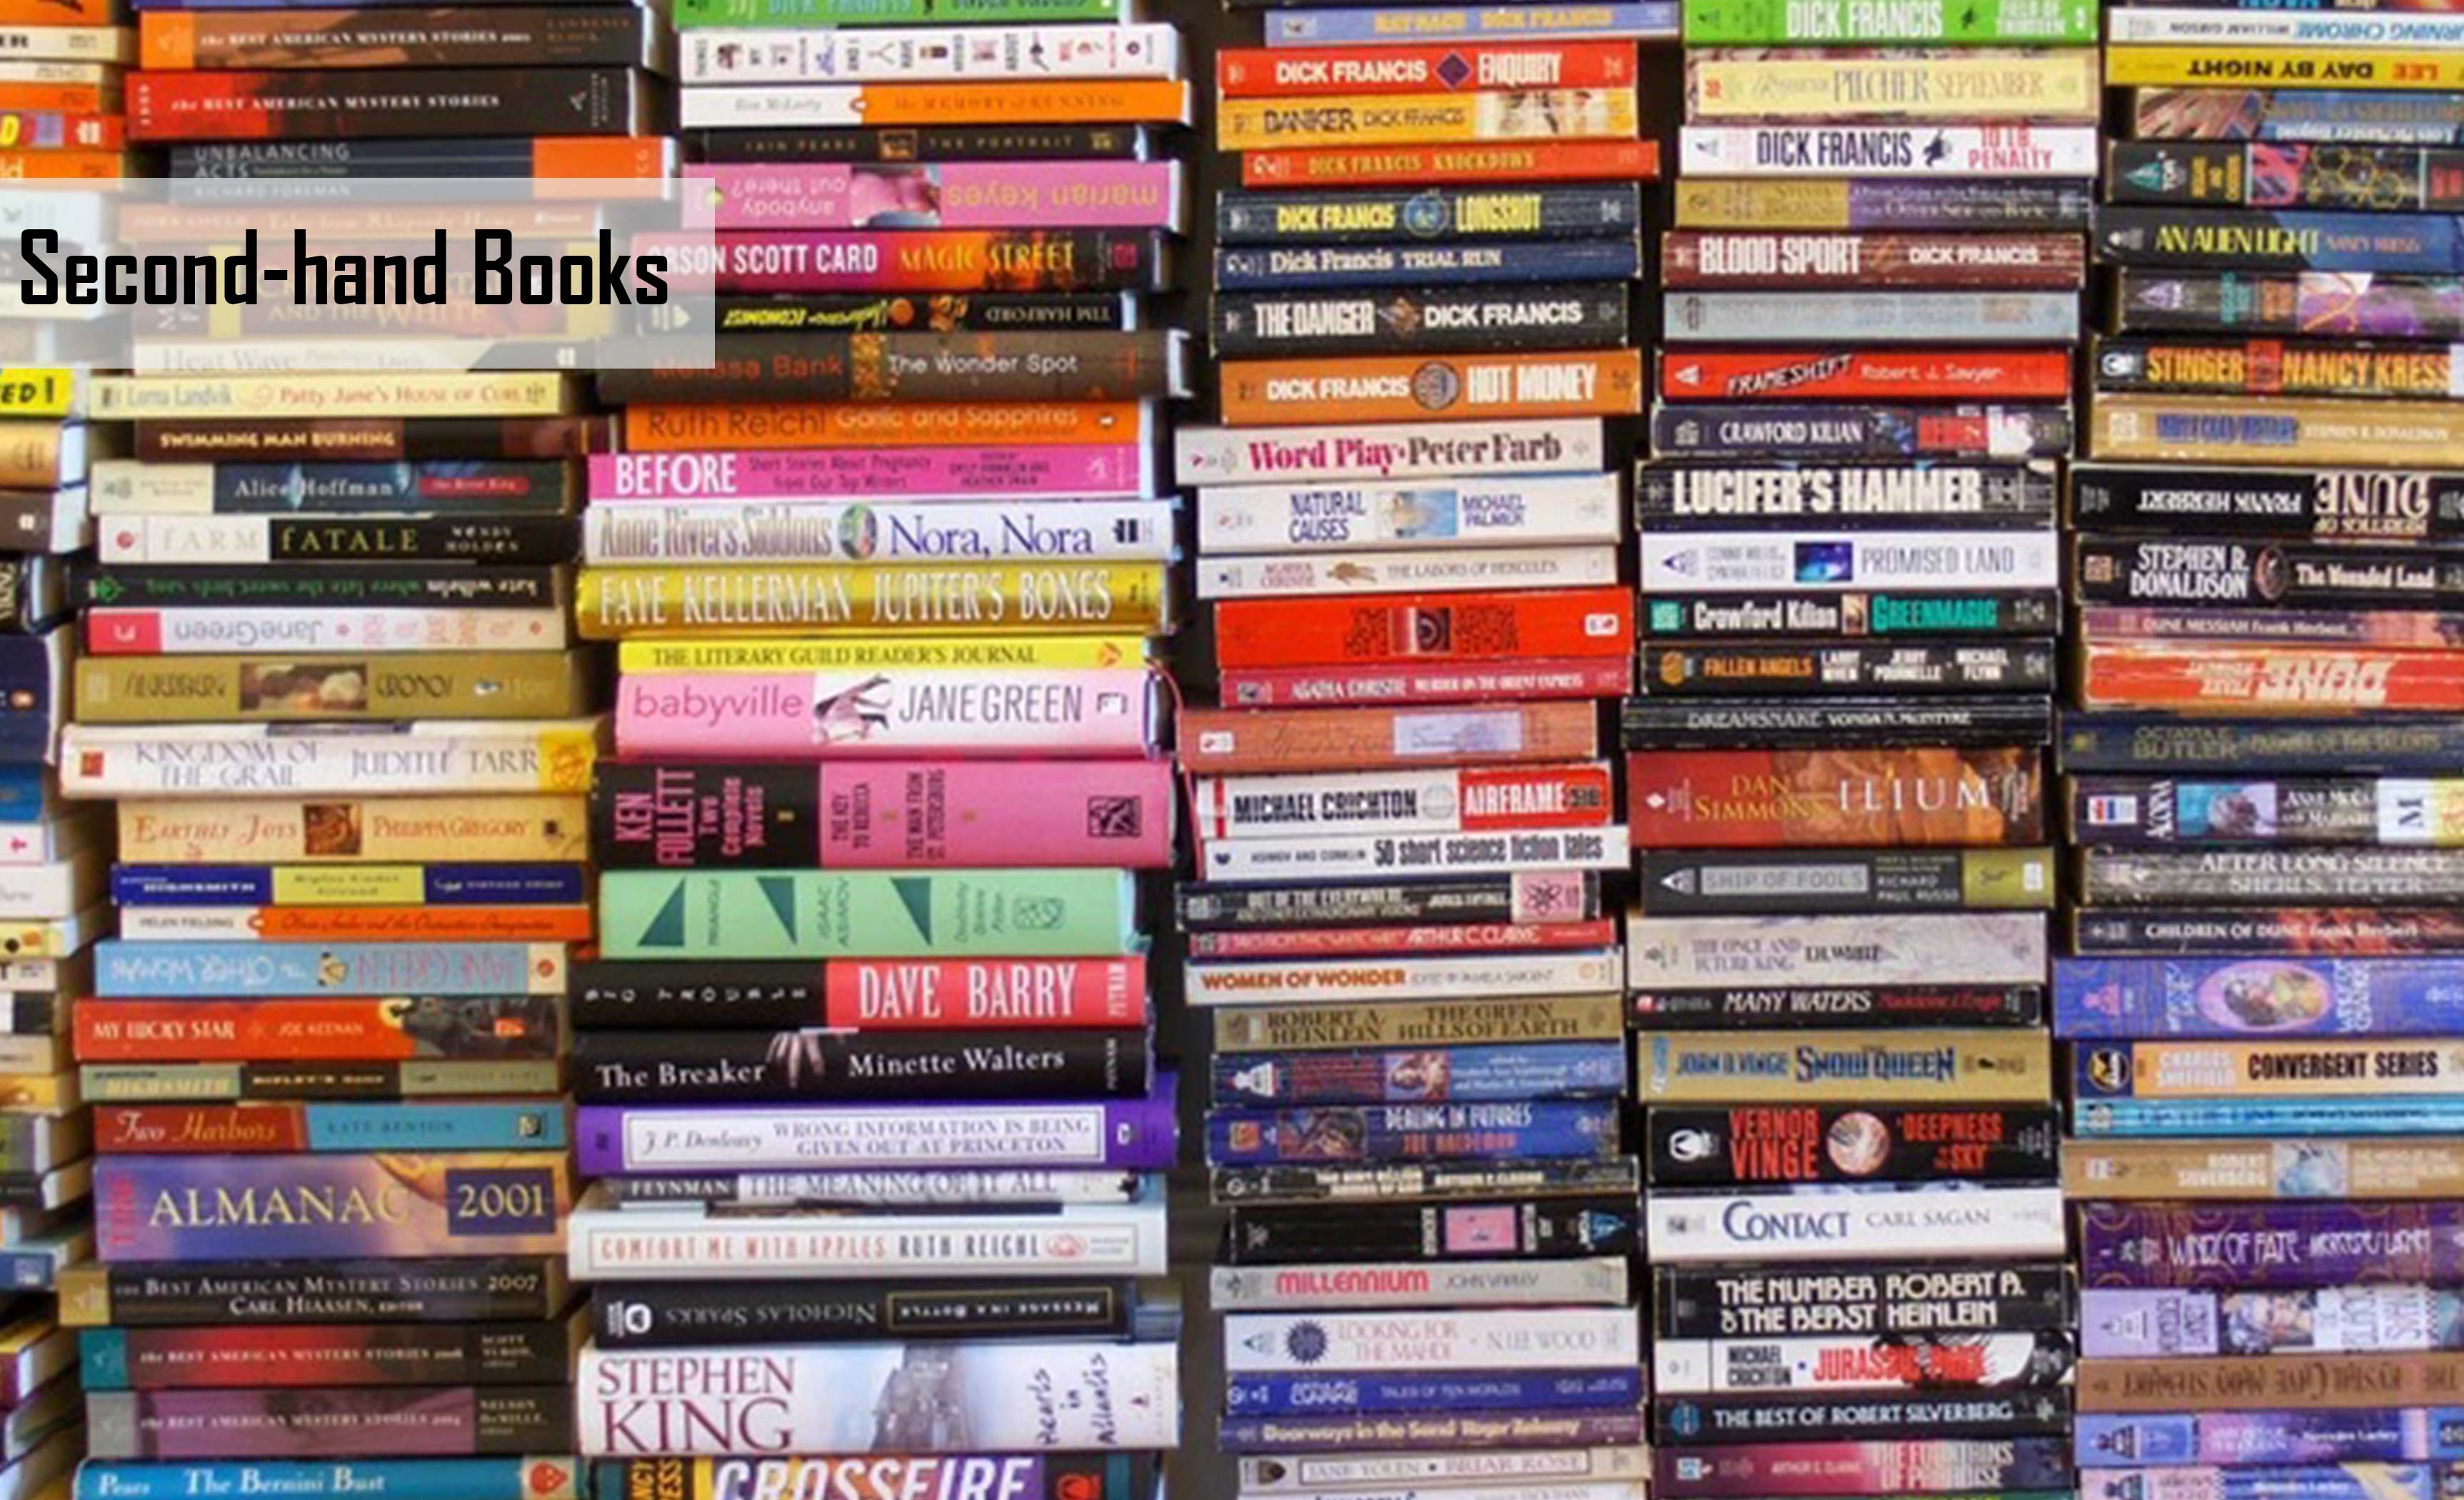 Second-hand Books - Buying Secondhand Books Online